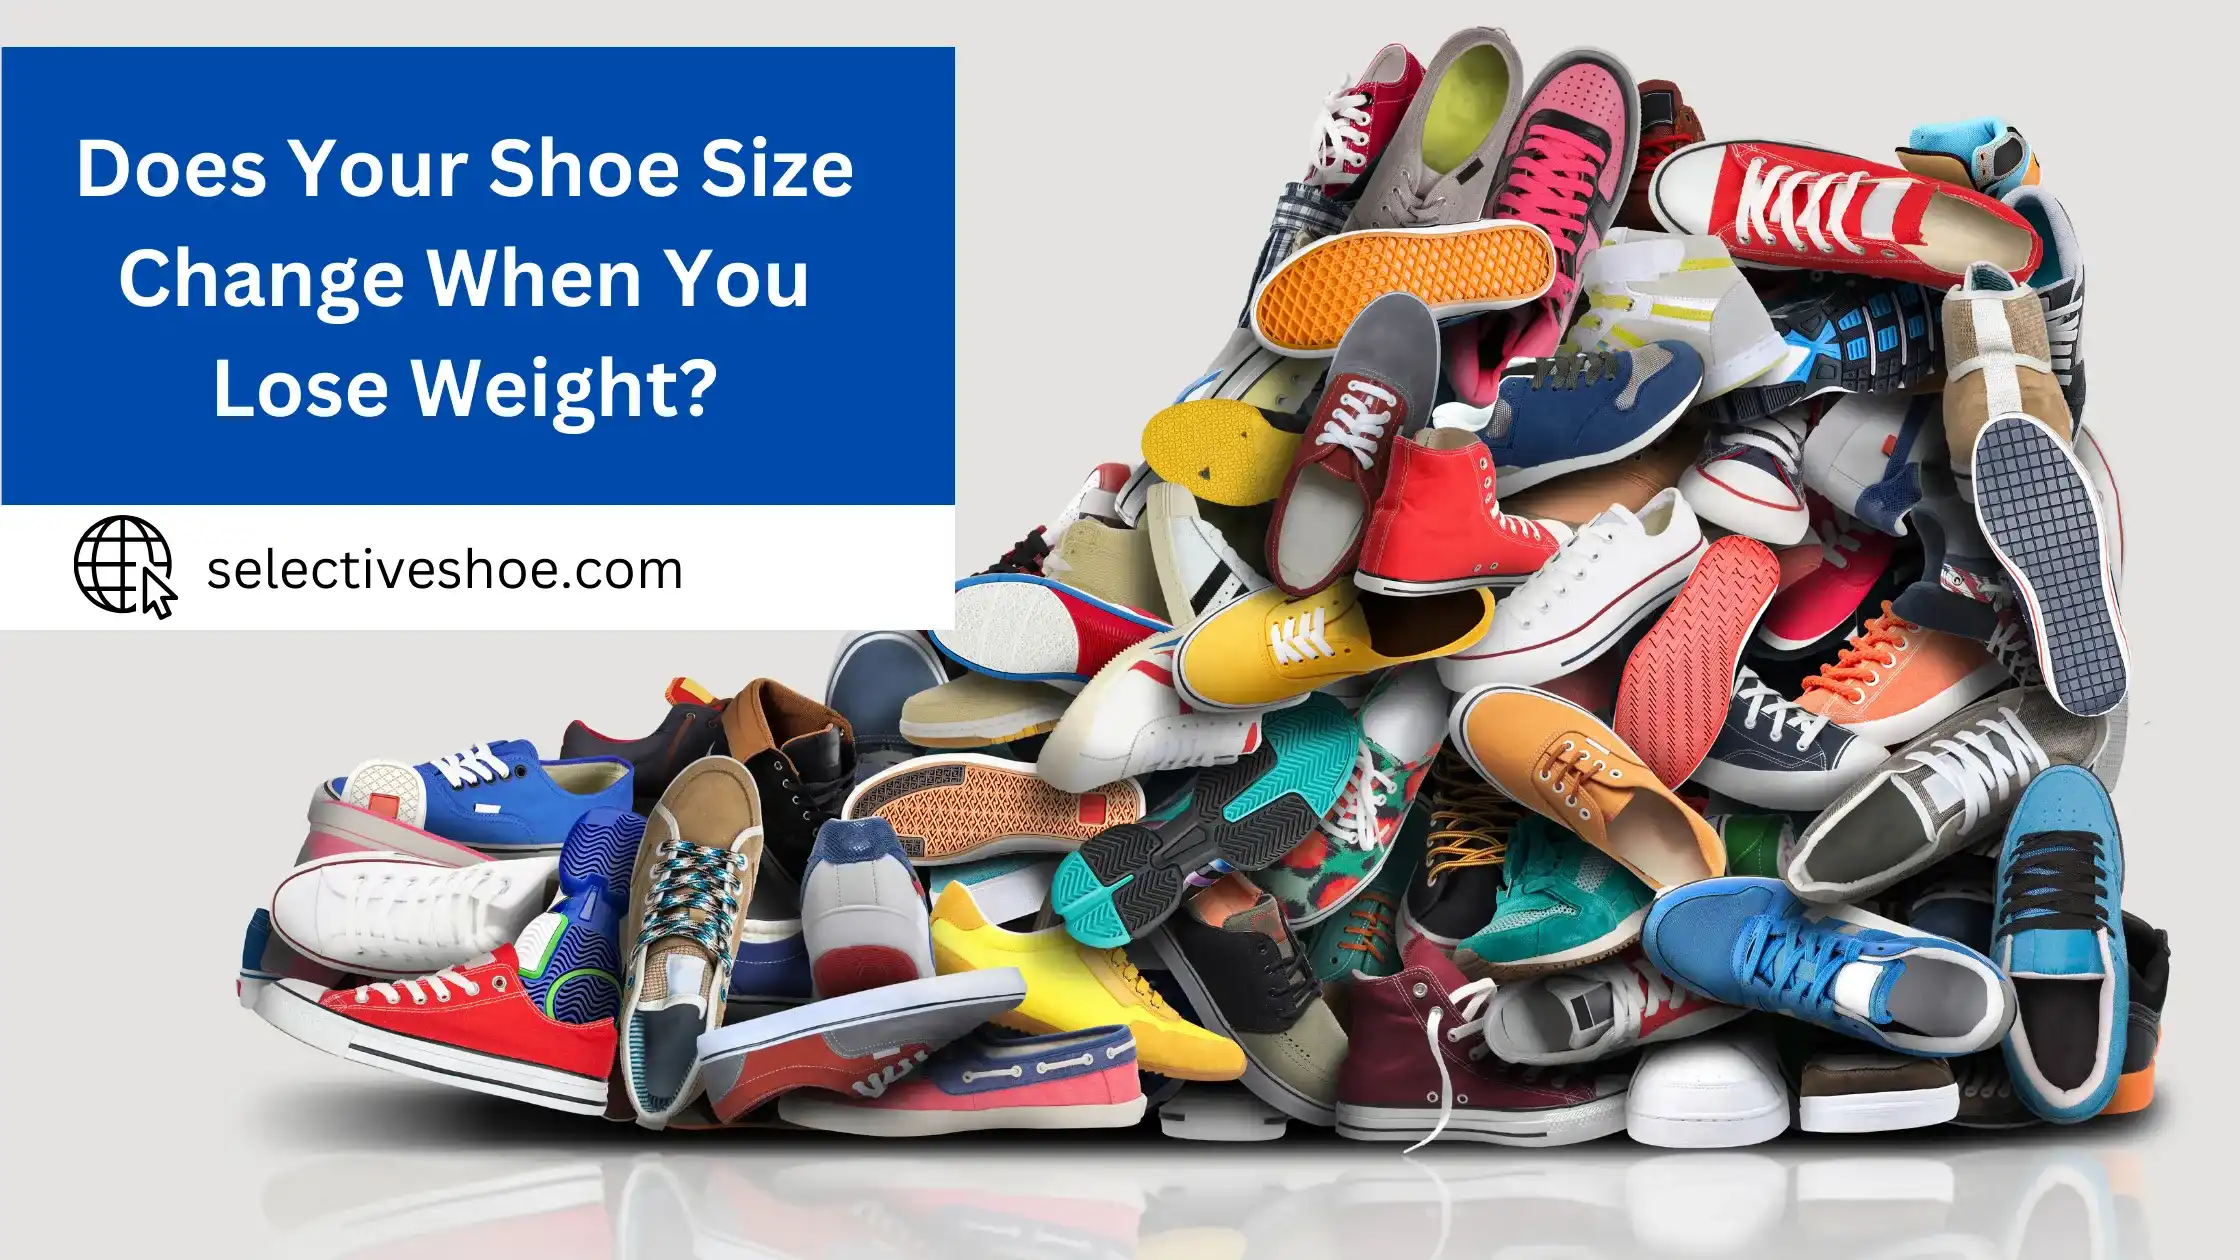 Does Your Shoe Size Change When You Lose Weight?